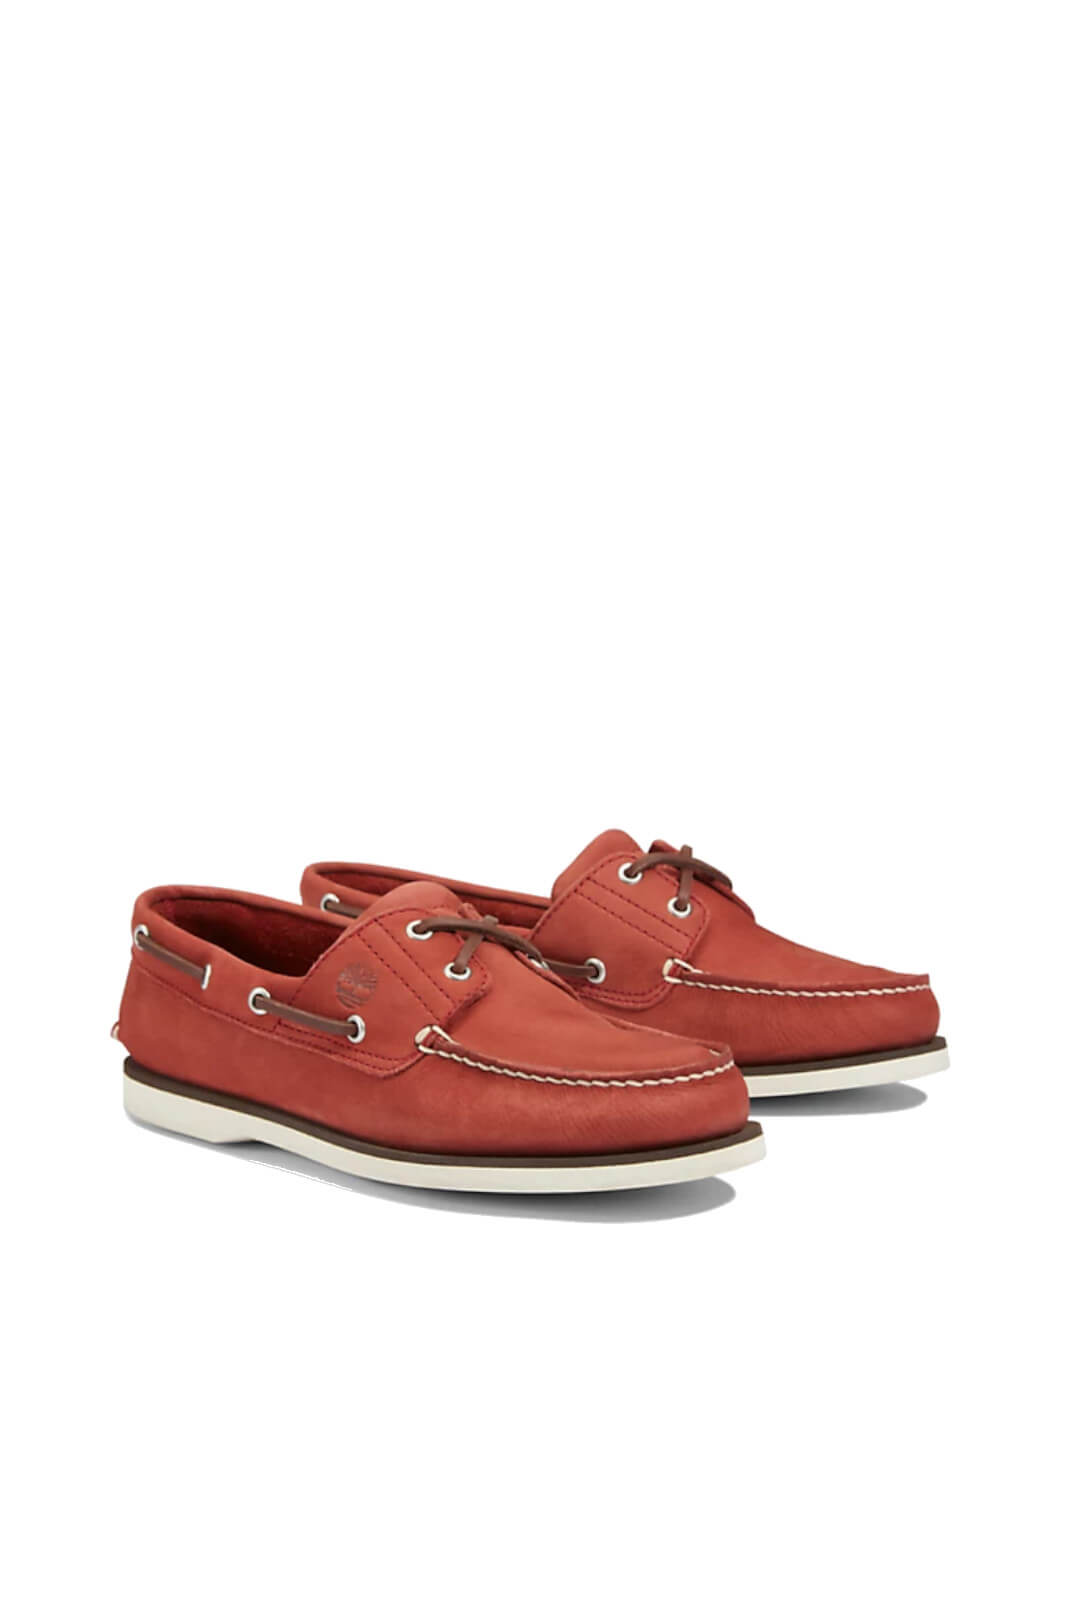 Timberland CLASSIC BOAT men's boat shoes